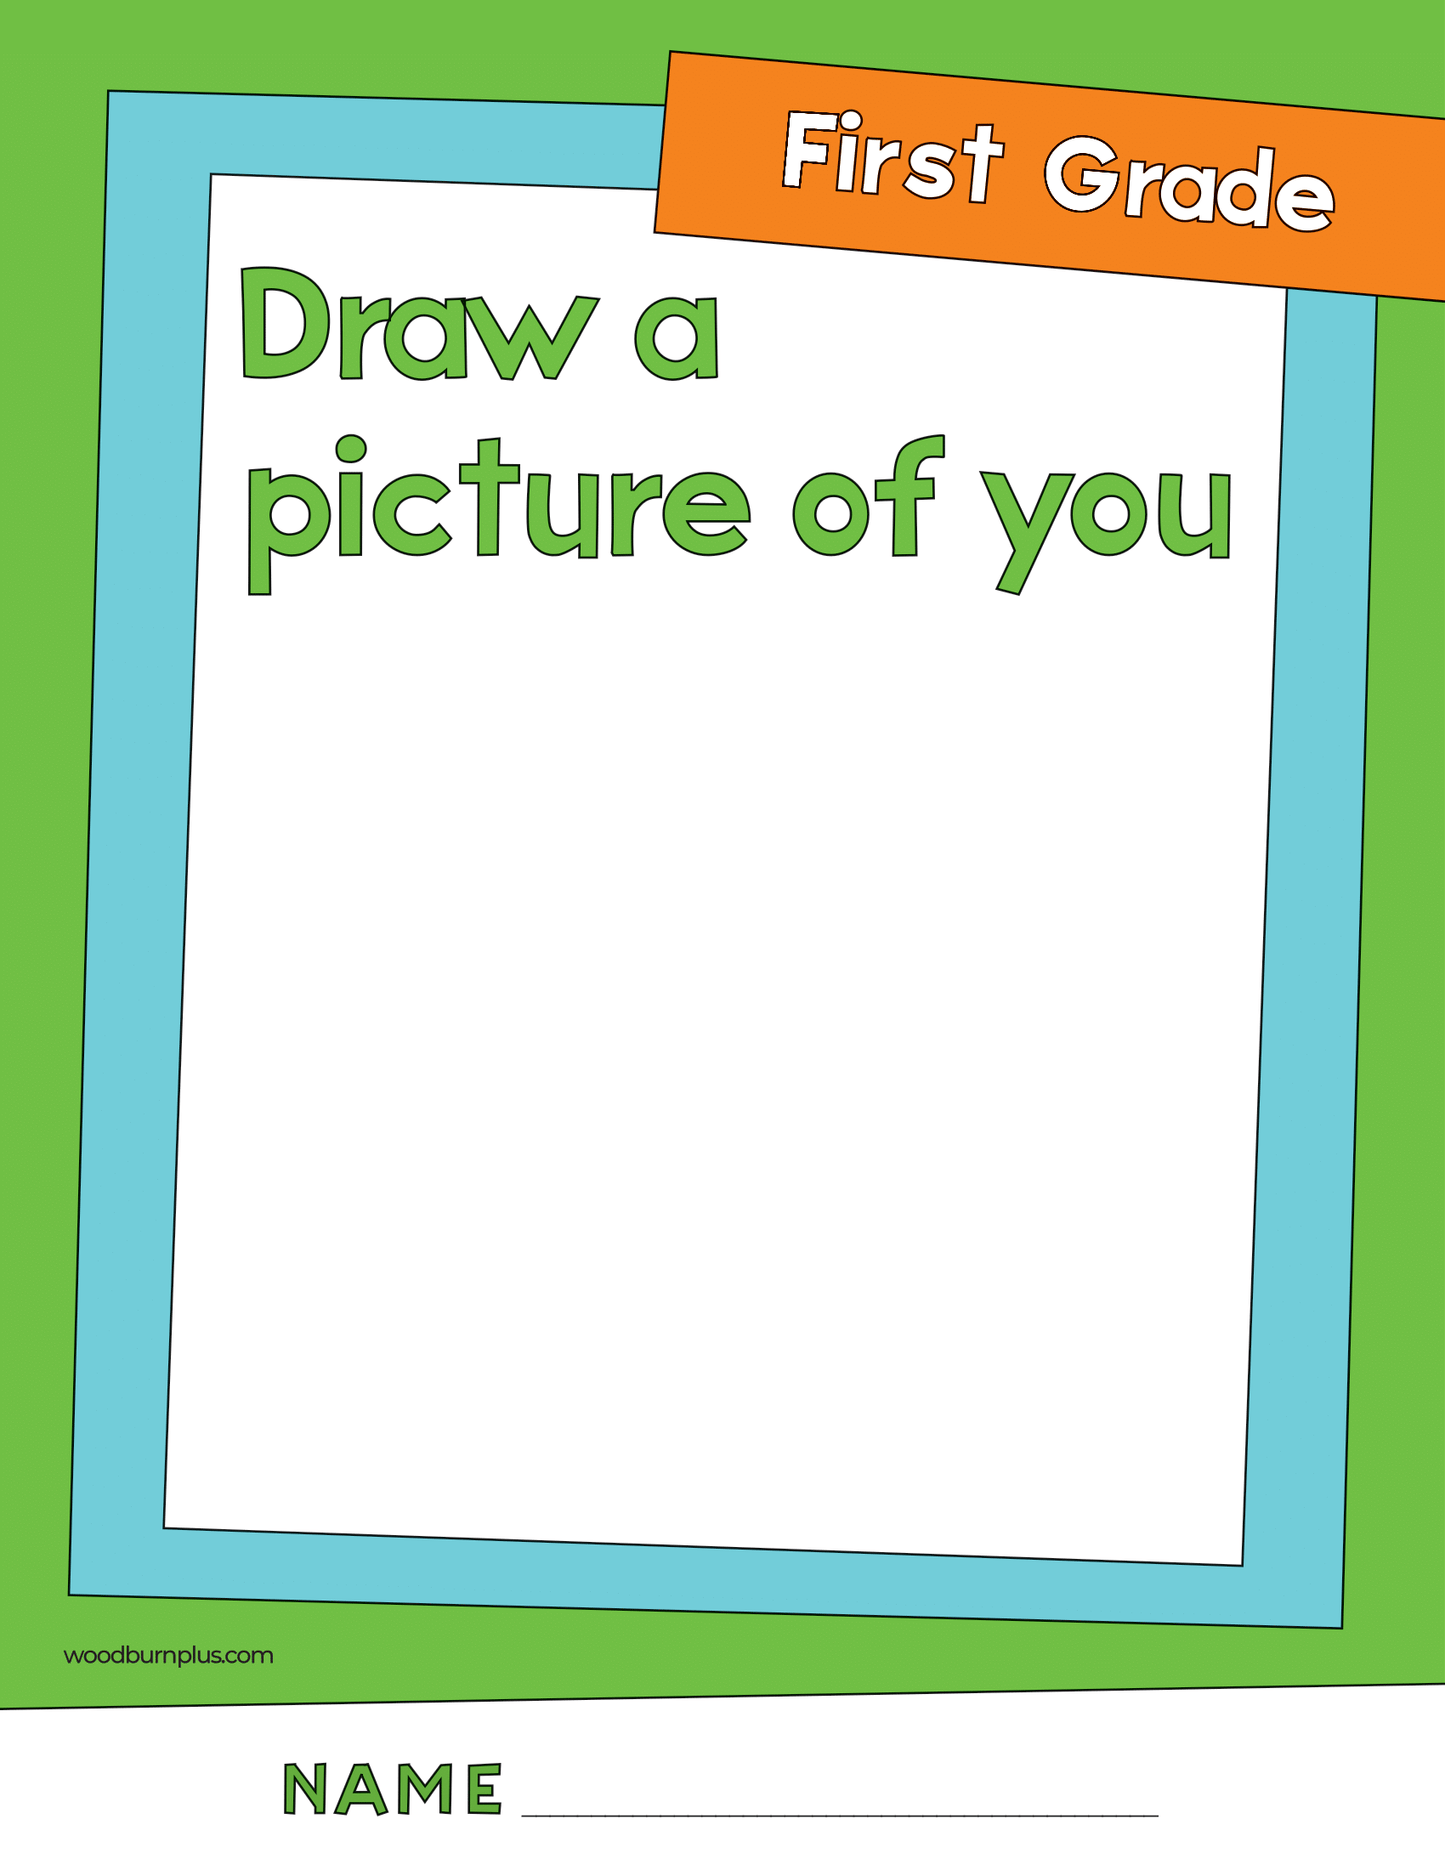 First Grade - Draw a Picture of You